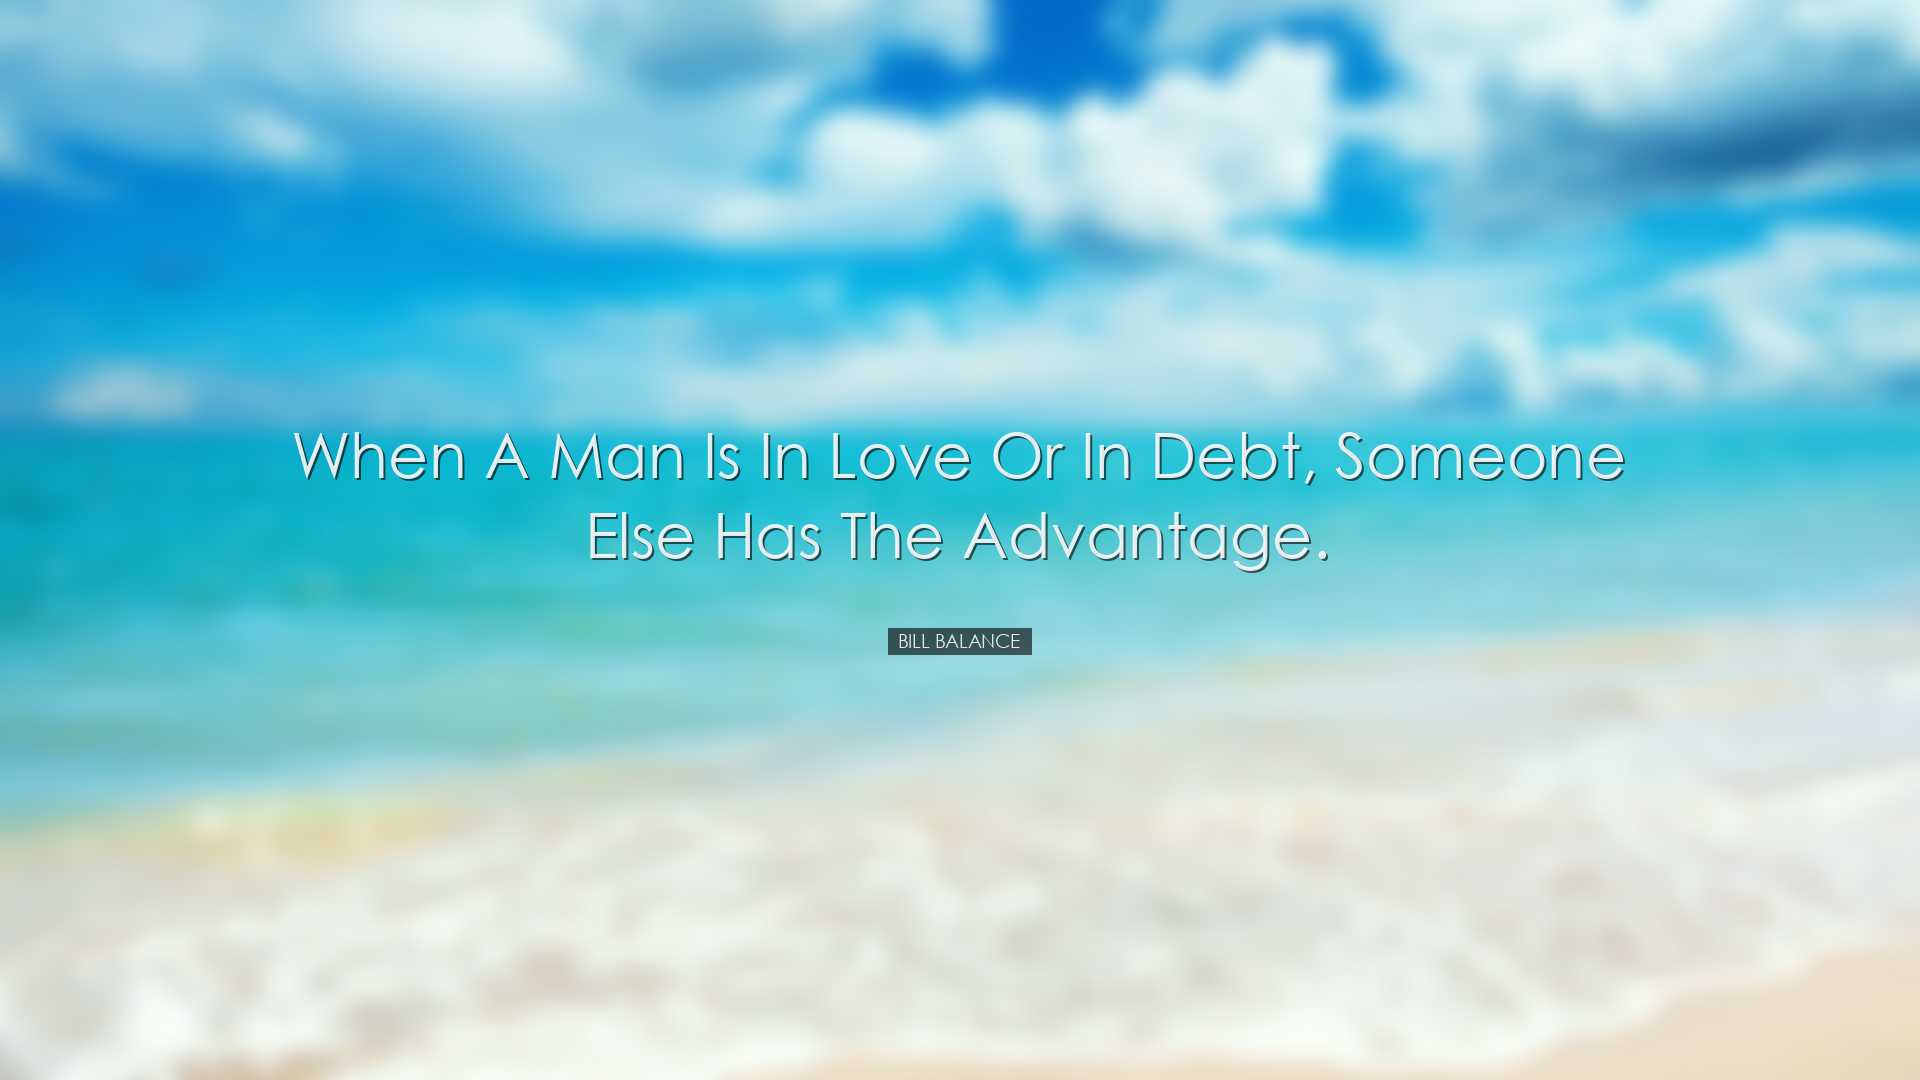 When a man is in love or in debt, someone else has the advantage.